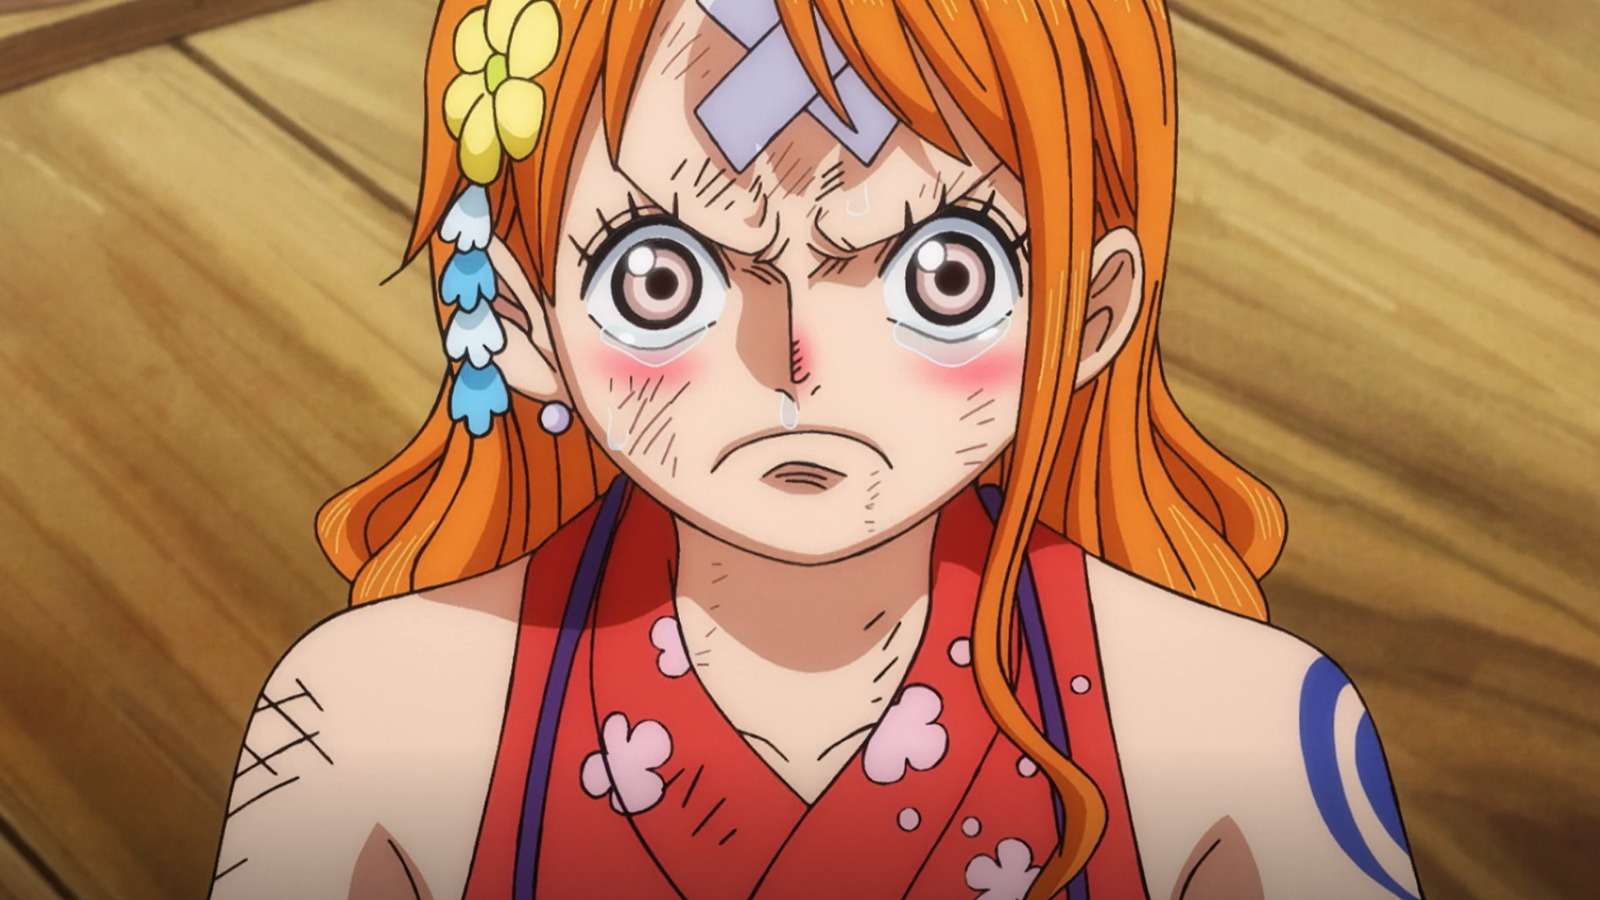 An image of Nami from One Piece Episode 1070